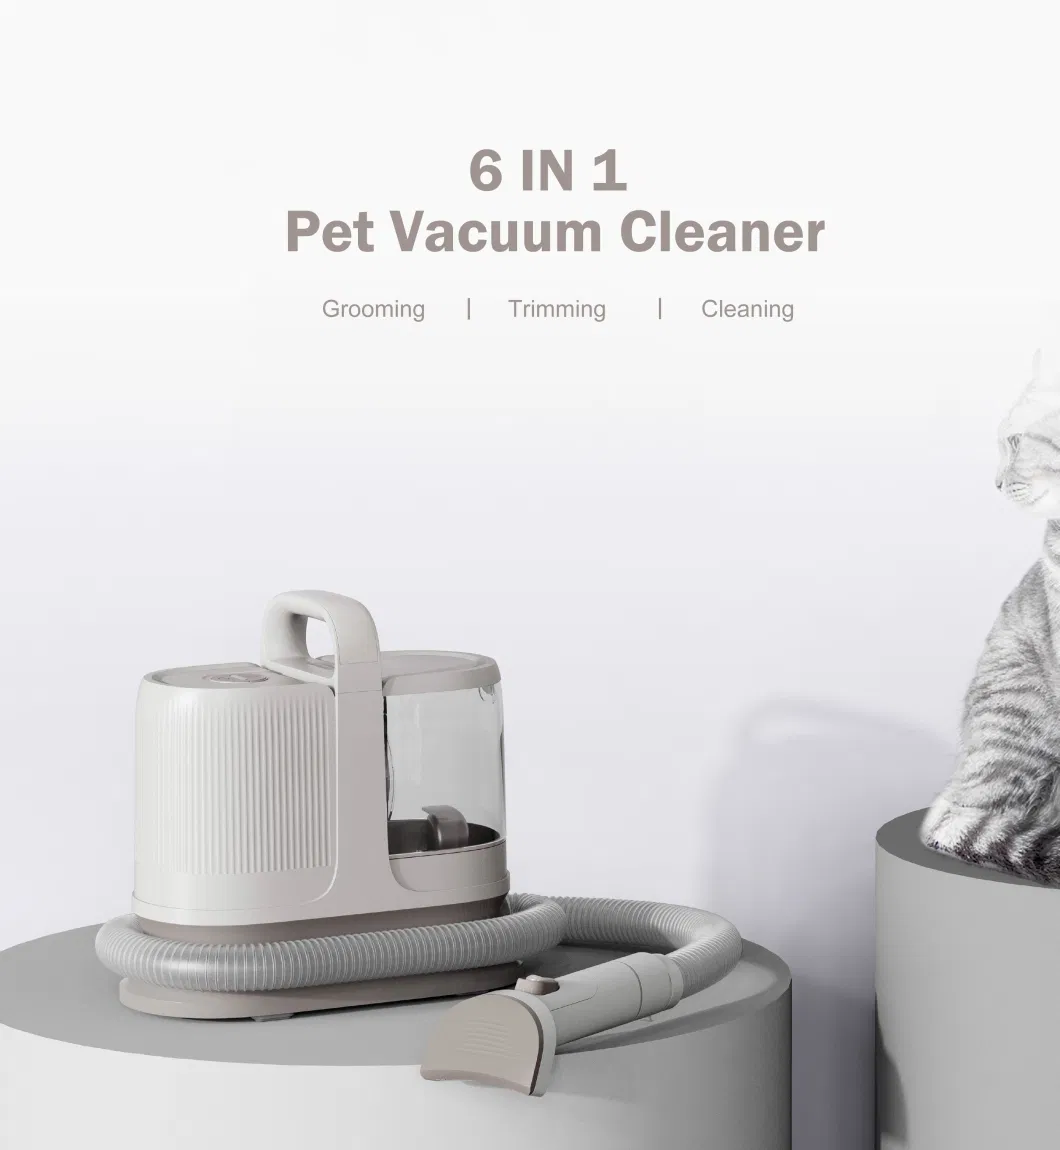 Pet Vacuum Cleaner Electric Clipper Slicker Deshedding Cleaning Dog and Cat Hair Fur Grooming Brush Kit